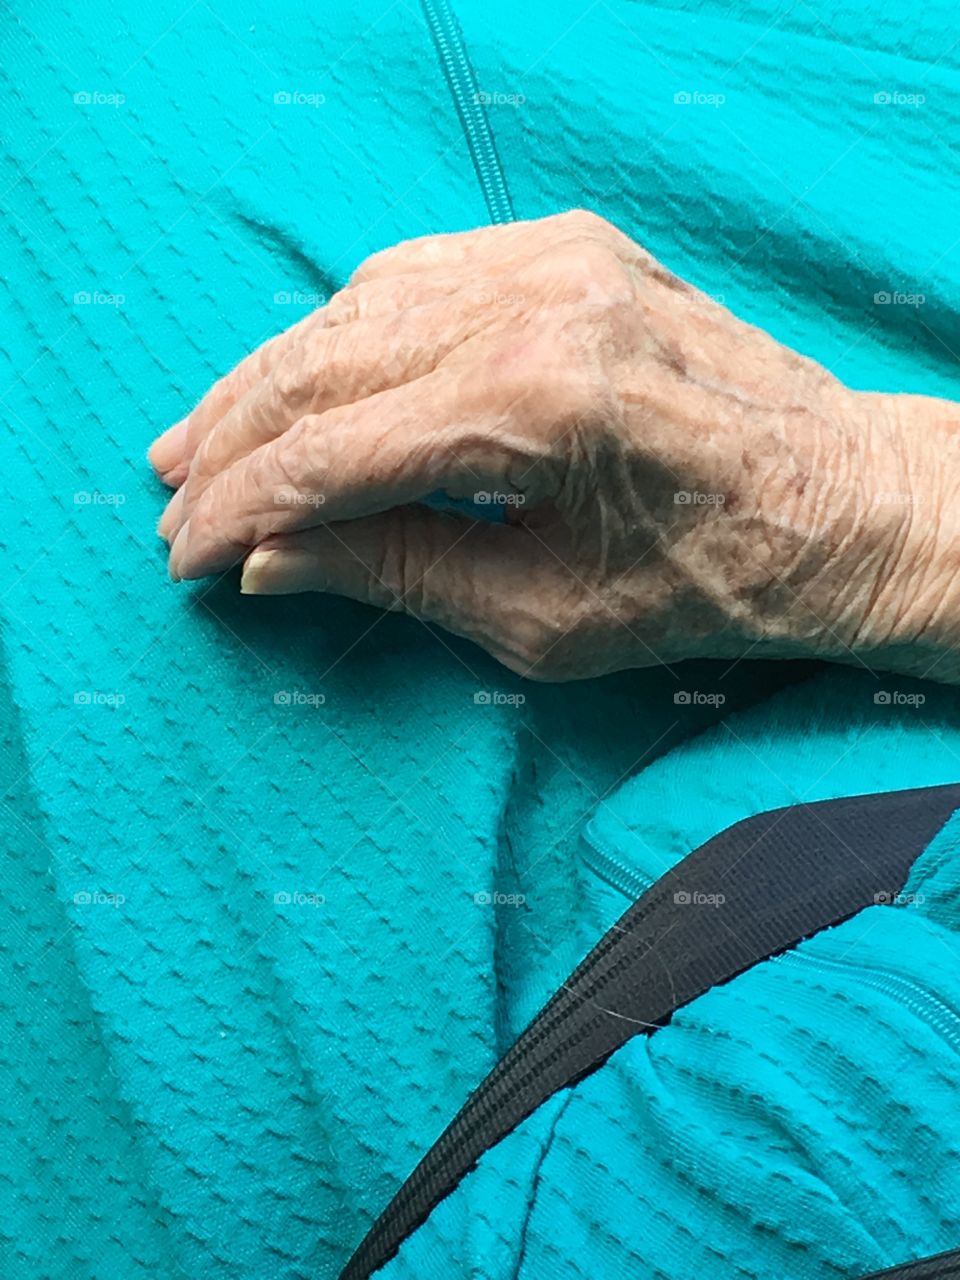 This 90 year old hand has worked through many of days. 